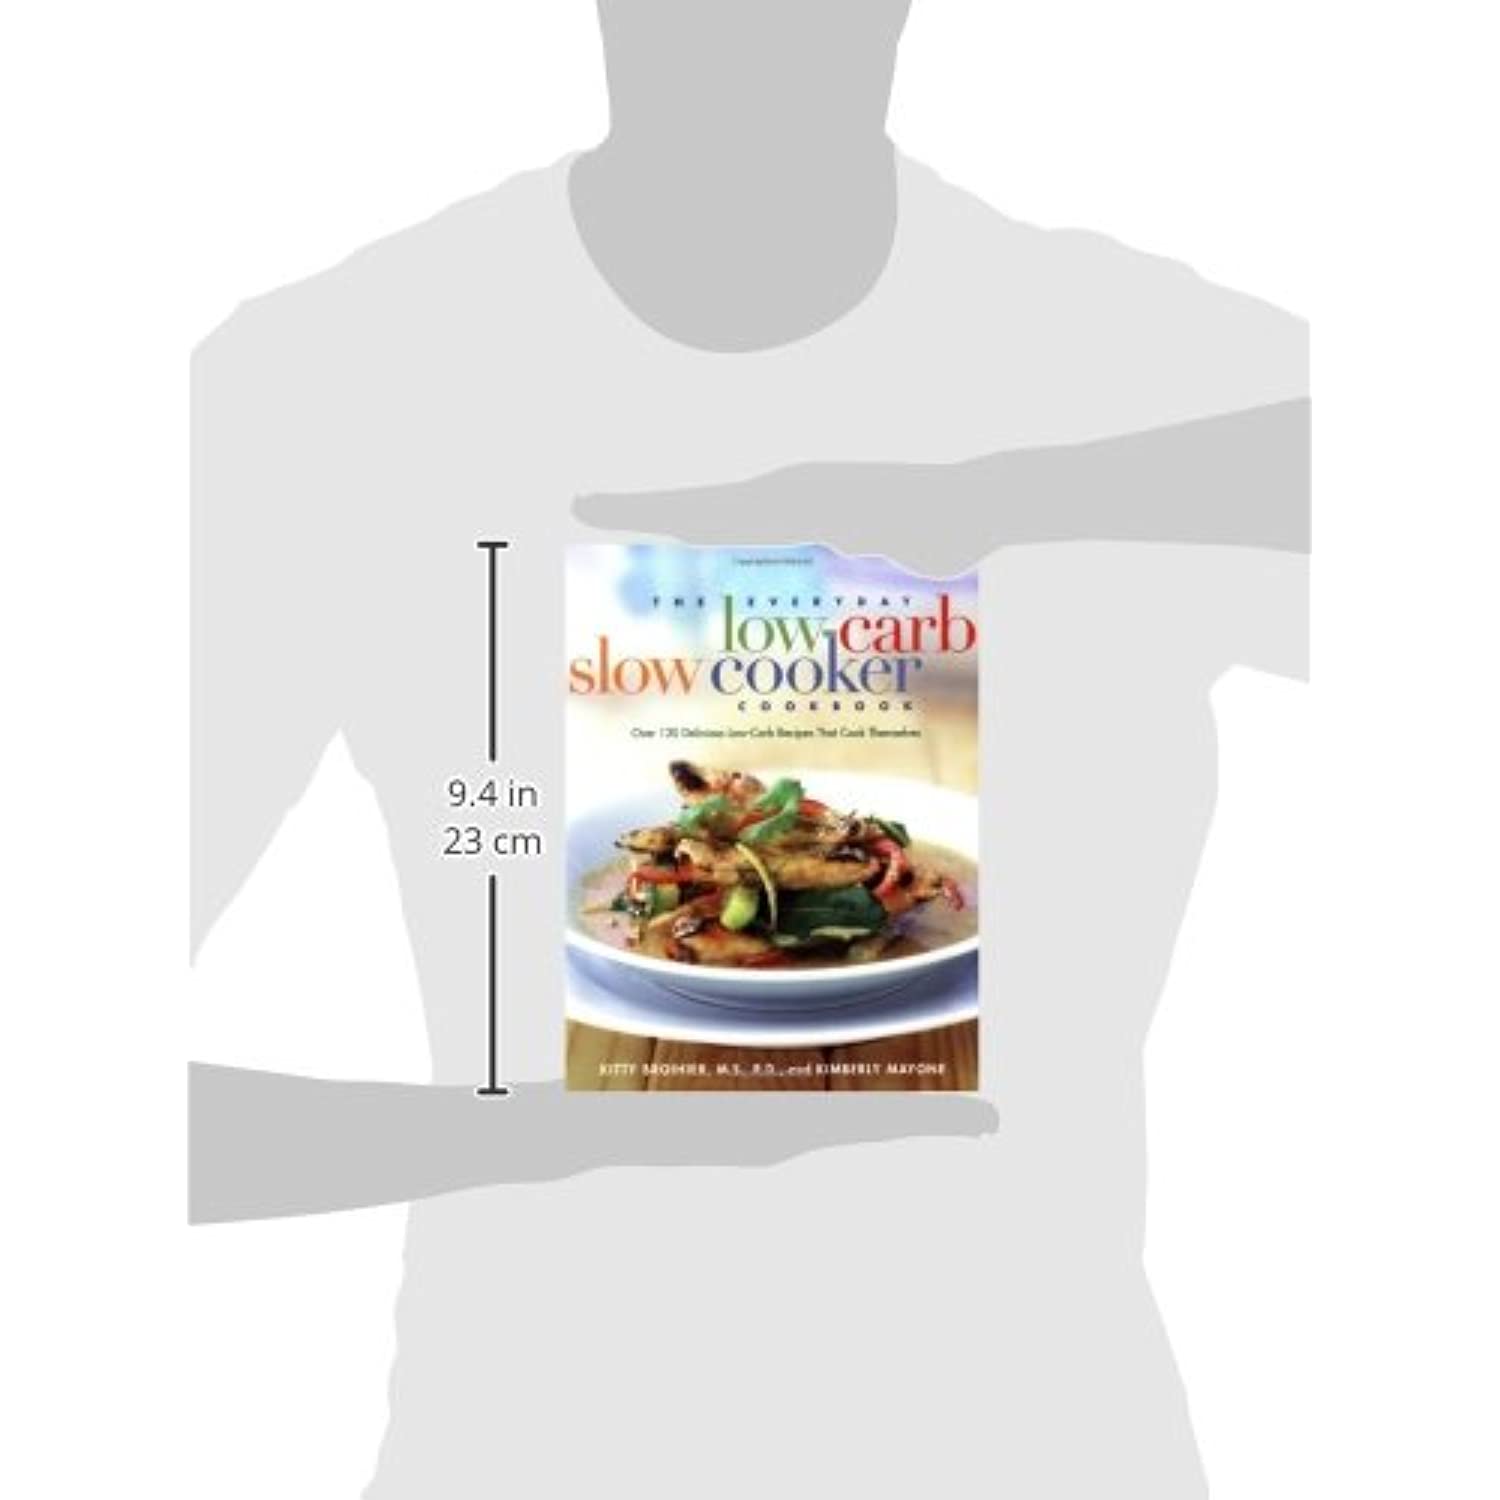 The Everyday Low Carb Slow Cooker Cookbook (Paperback) - image 3 of 3